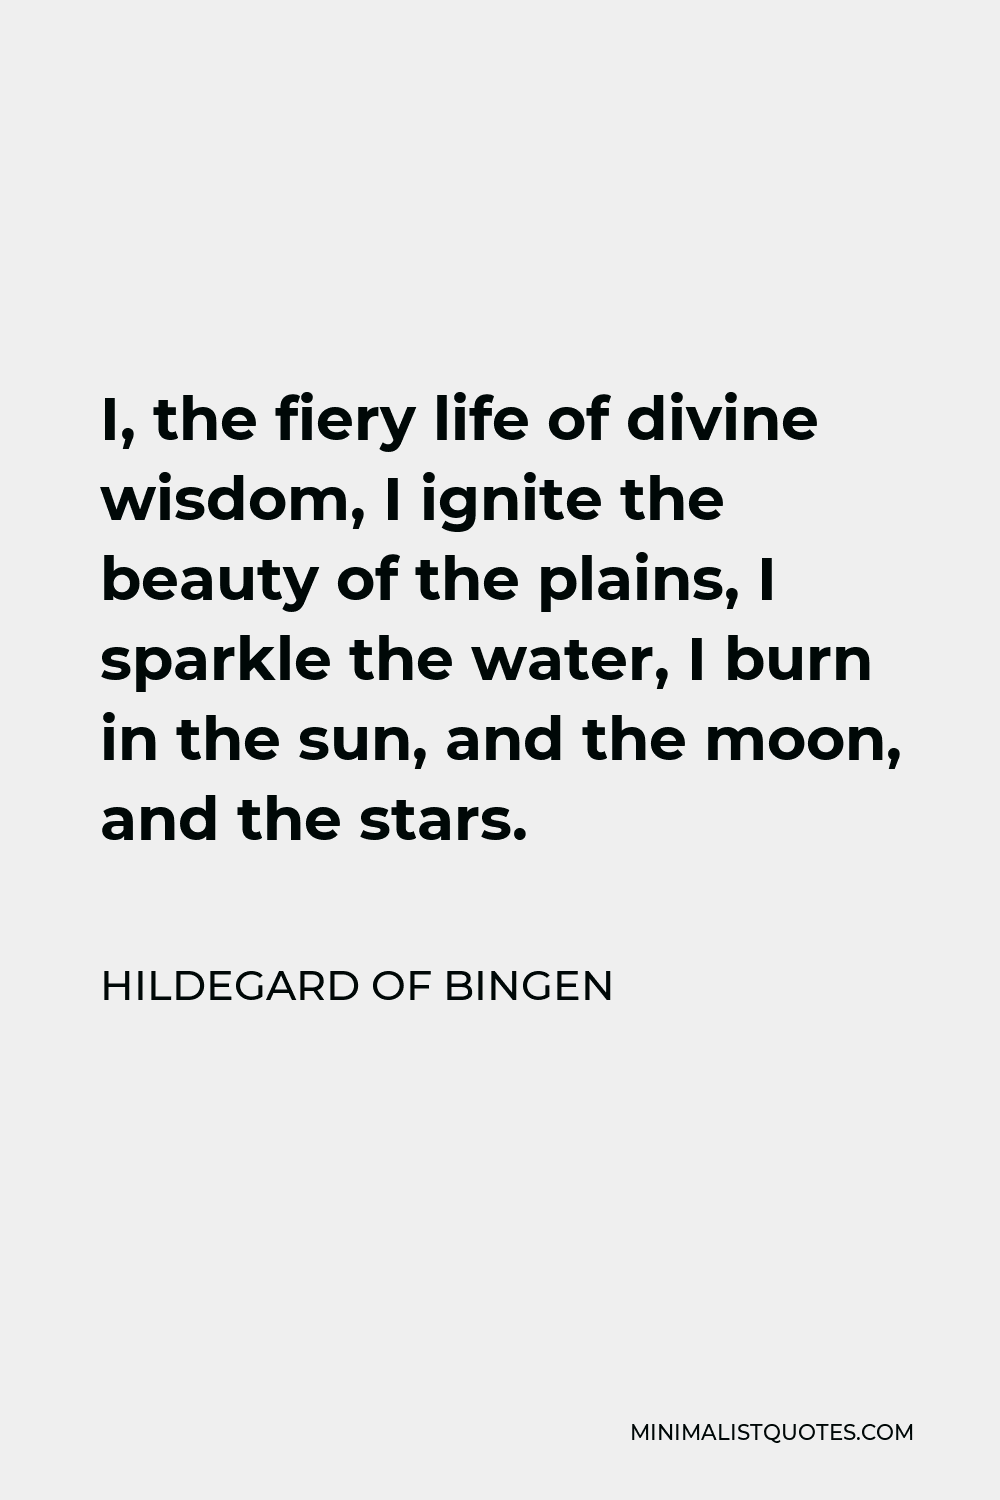 Hildegard of Bingen Quote - I, the fiery life of divine wisdom, I ignite the beauty of the plains, I sparkle the water, I burn in the sun, and the moon, and the stars.